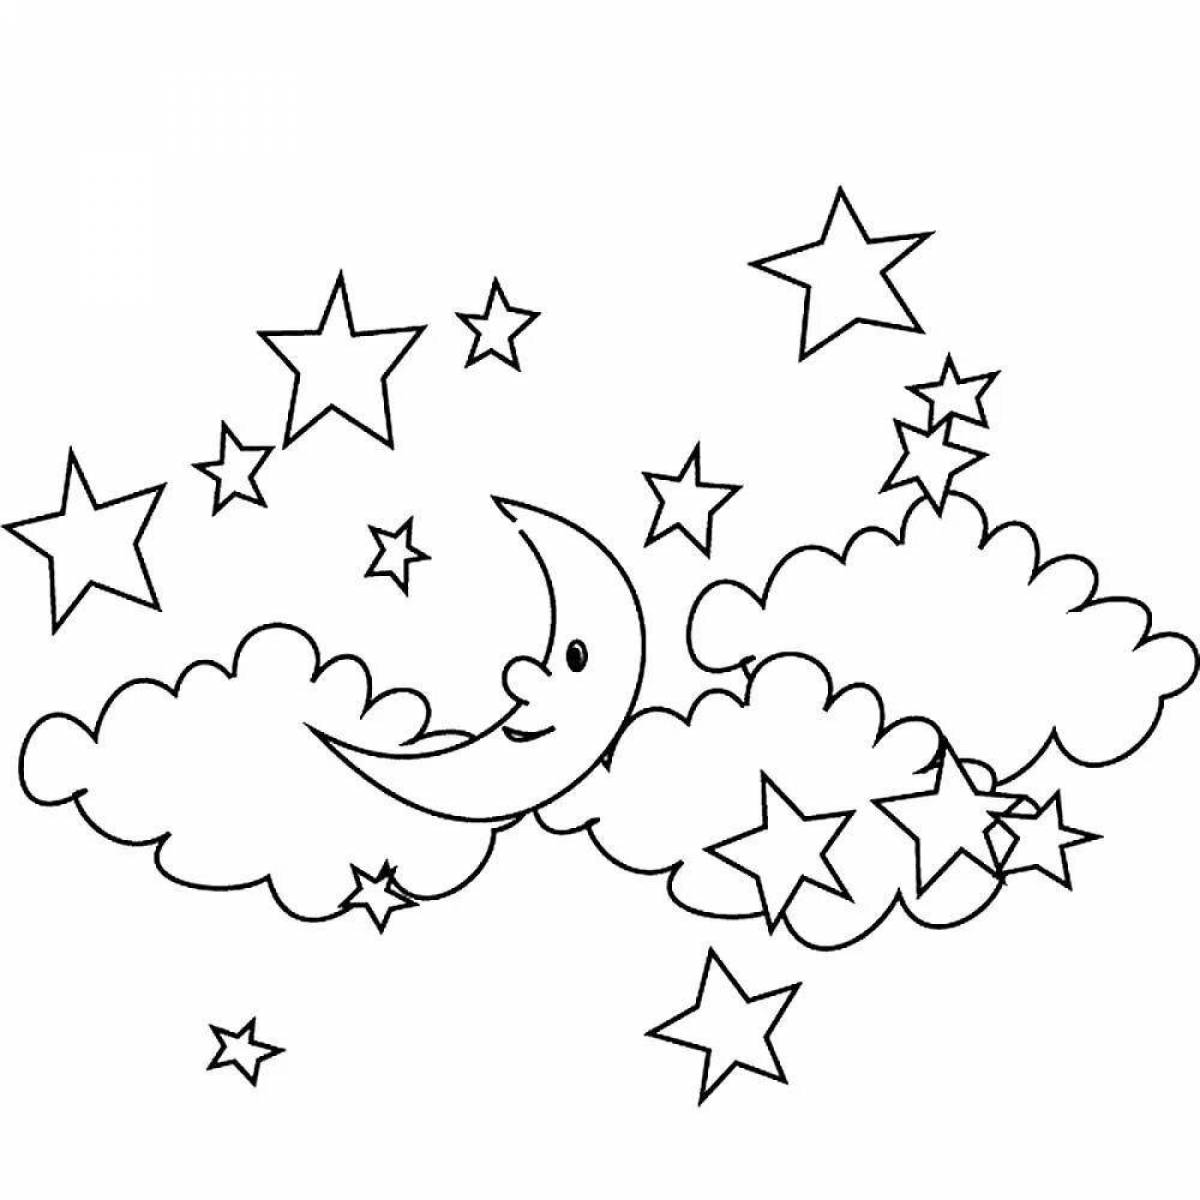 Large starry sky coloring book for kids